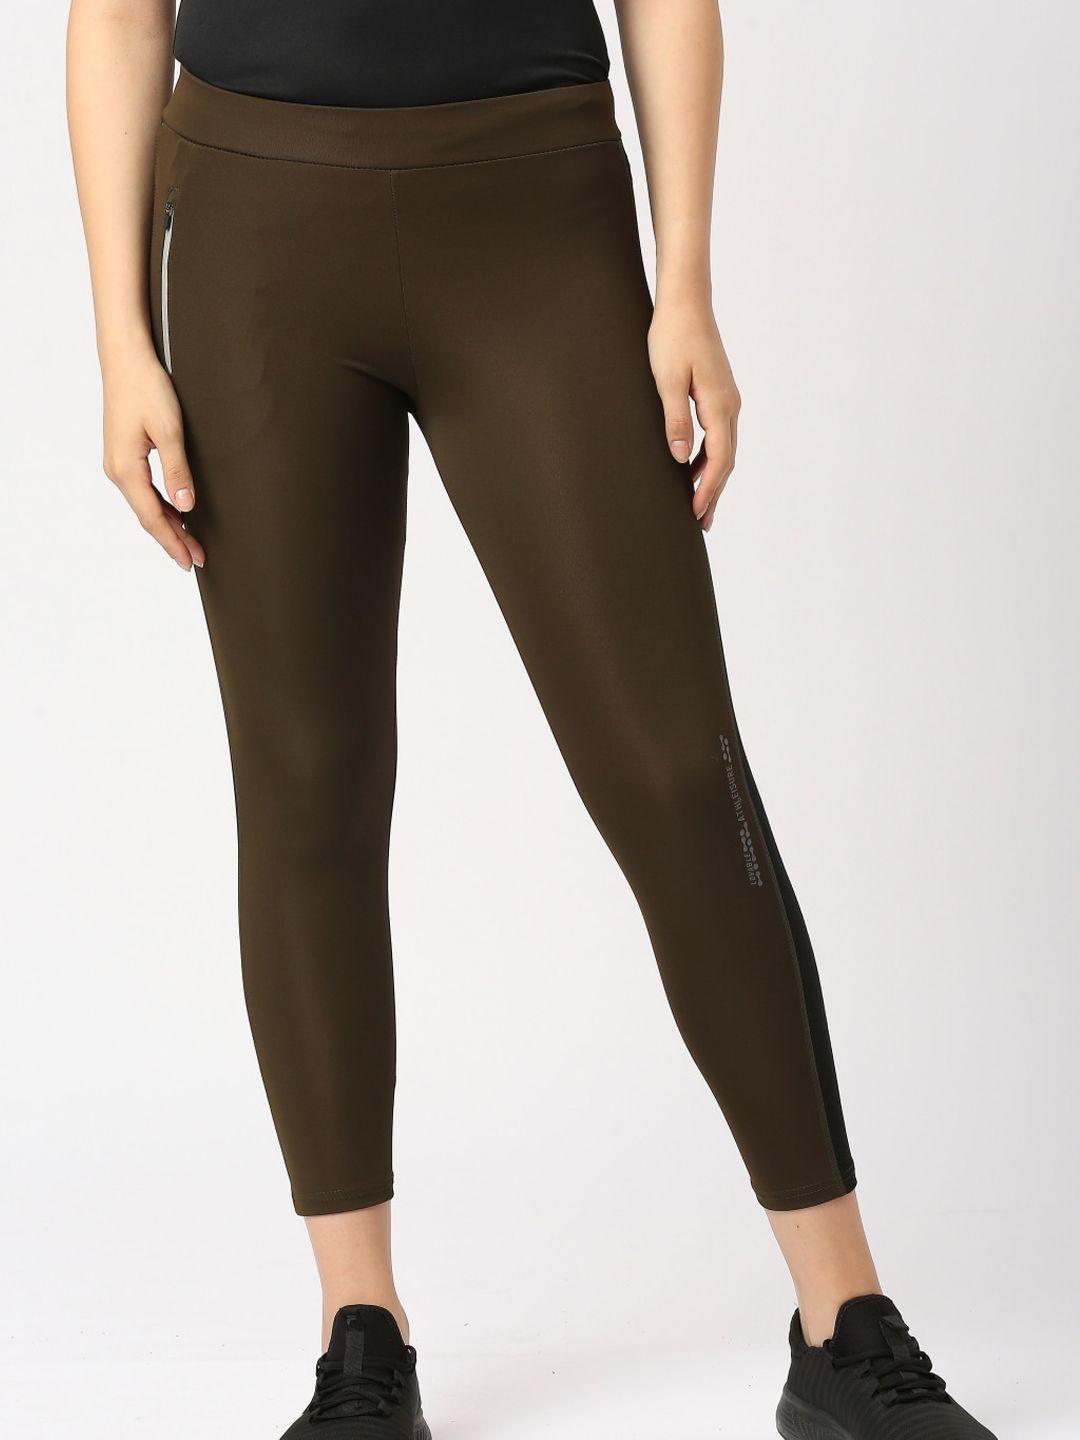 lovable sport women ankle length slim-fit training or gym track pant